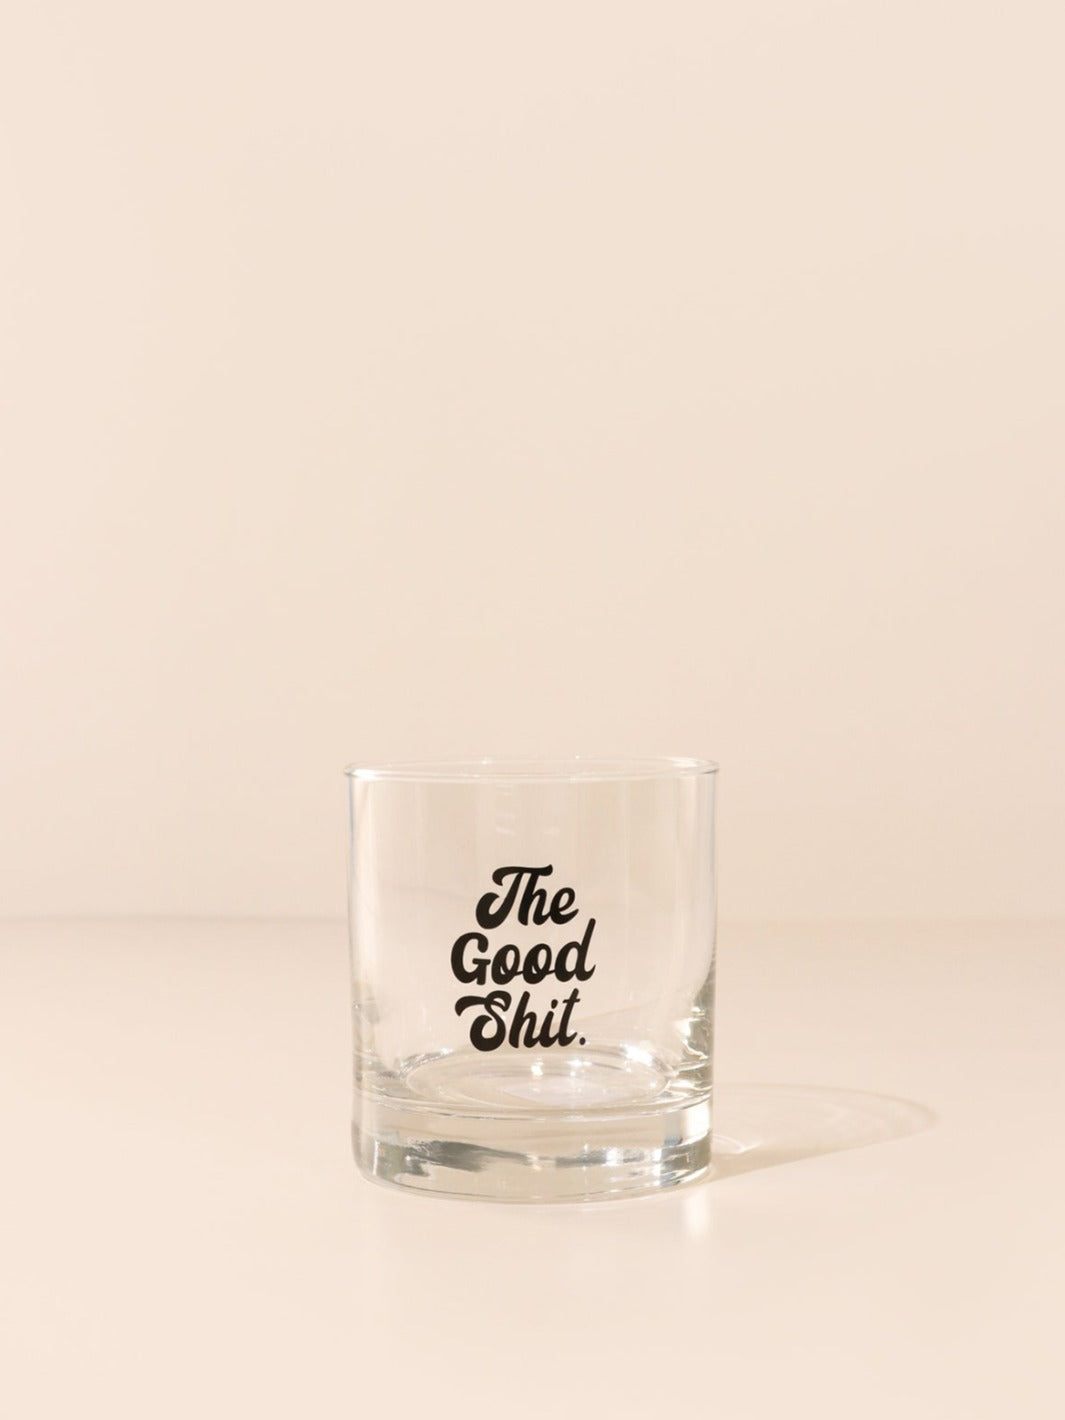 Fun and Whimsical Whiskey Glass